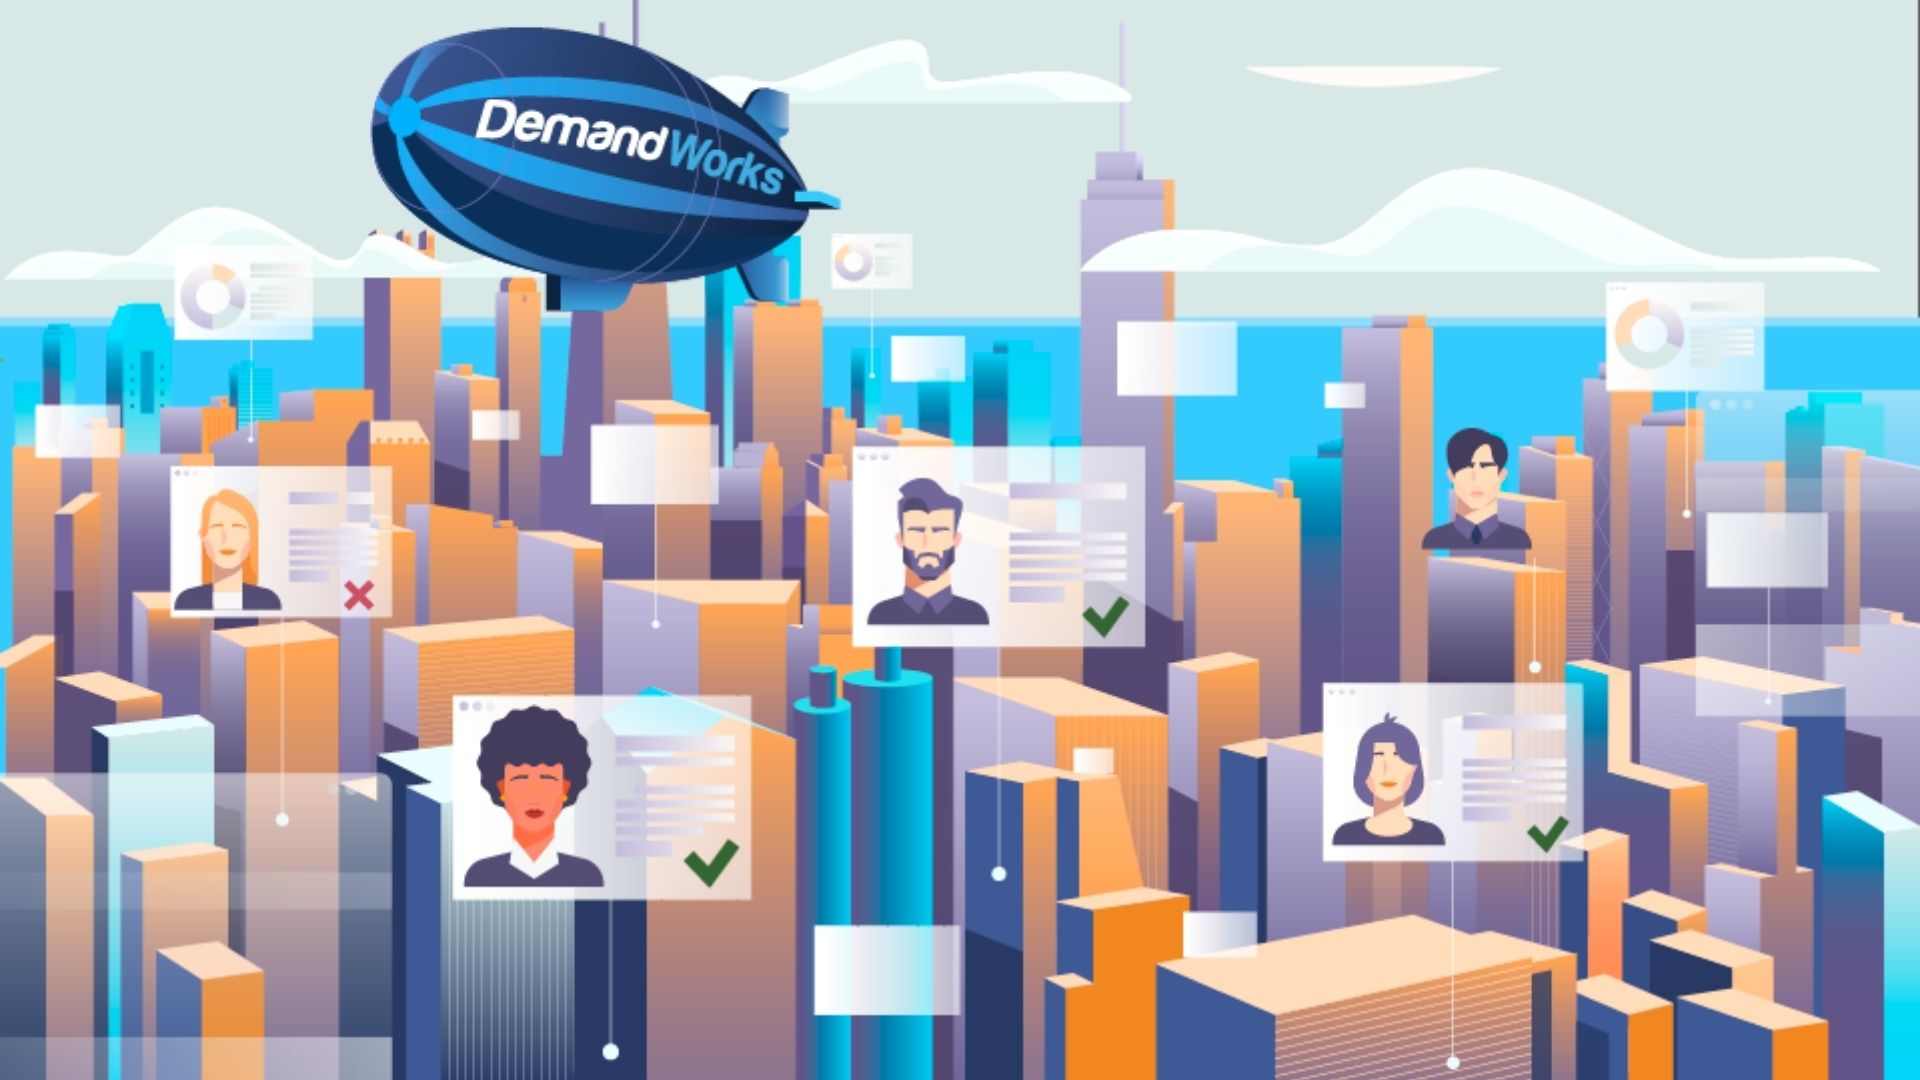 DemandWorks - Animated video created by Darvideo Studio